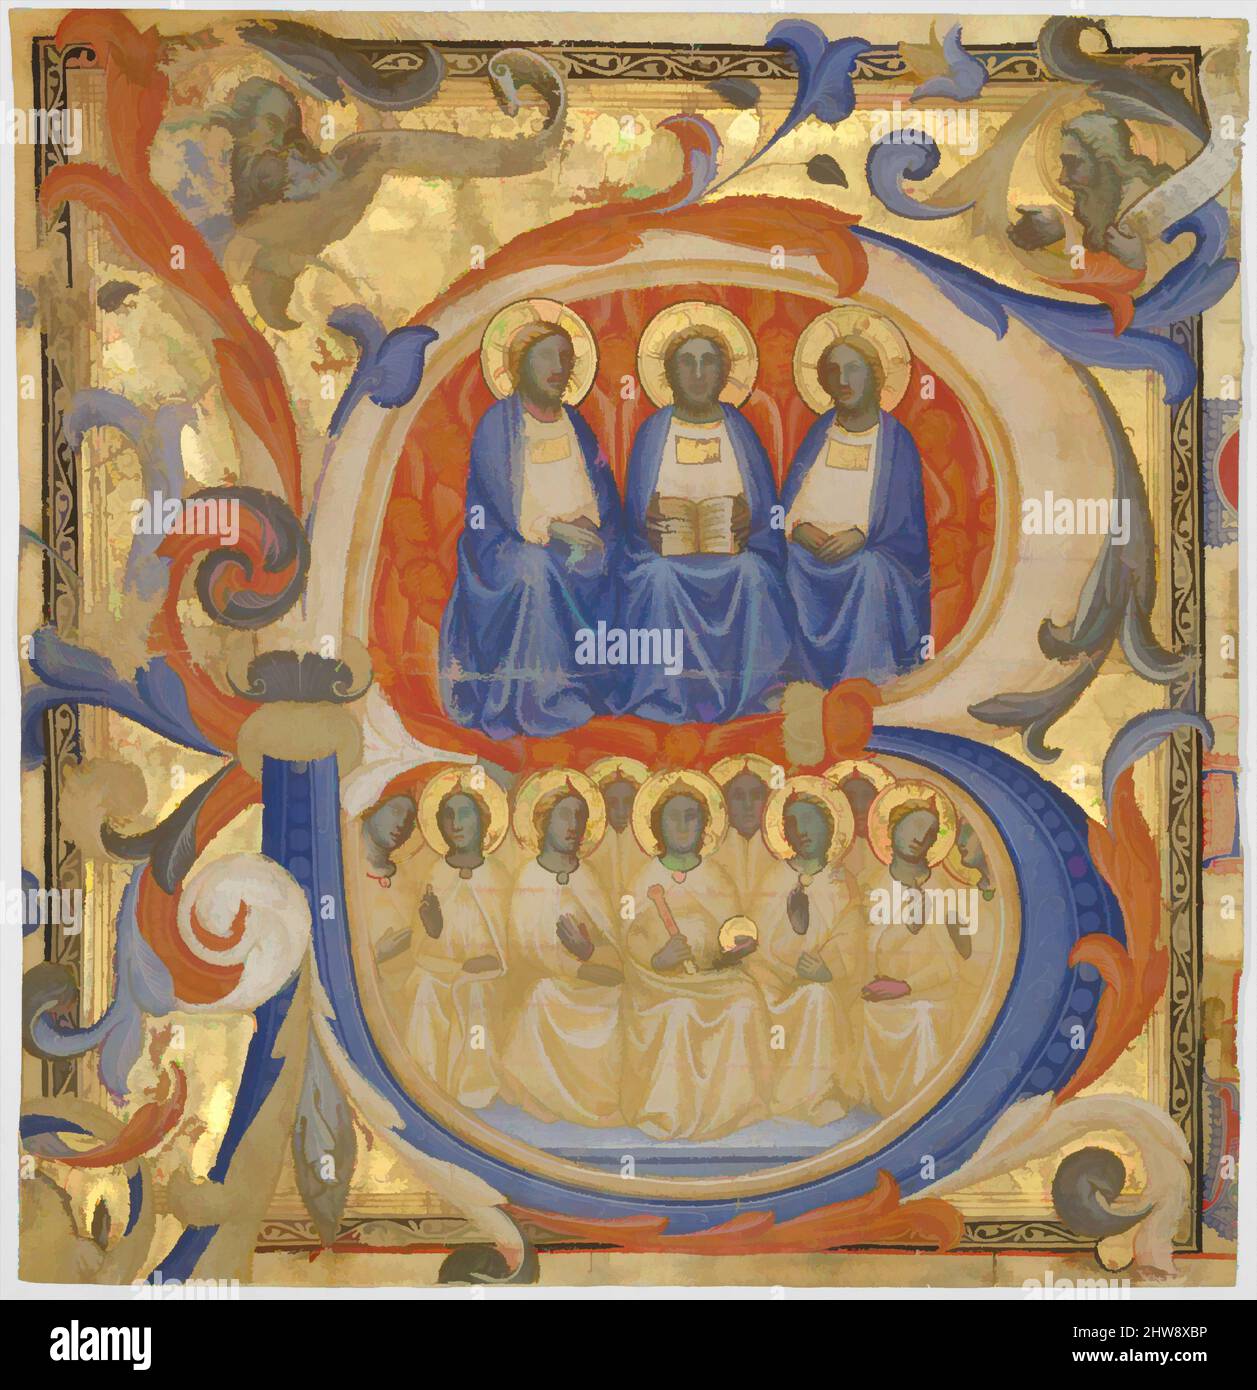 Art inspired by The Trinity in an Initial B, Probably 1387, Italian, Siena, Tempera and gold on parchment, Cutting: 10 9/16 x 10 1/16 in. (26.8 x 25.5cm), Manuscripts and Illuminations, Master of the Codex Rossiano (Sienese, active ca. 1380–1400), The initial B marks the beginning of, Classic works modernized by Artotop with a splash of modernity. Shapes, color and value, eye-catching visual impact on art. Emotions through freedom of artworks in a contemporary way. A timeless message pursuing a wildly creative new direction. Artists turning to the digital medium and creating the Artotop NFT Stock Photo